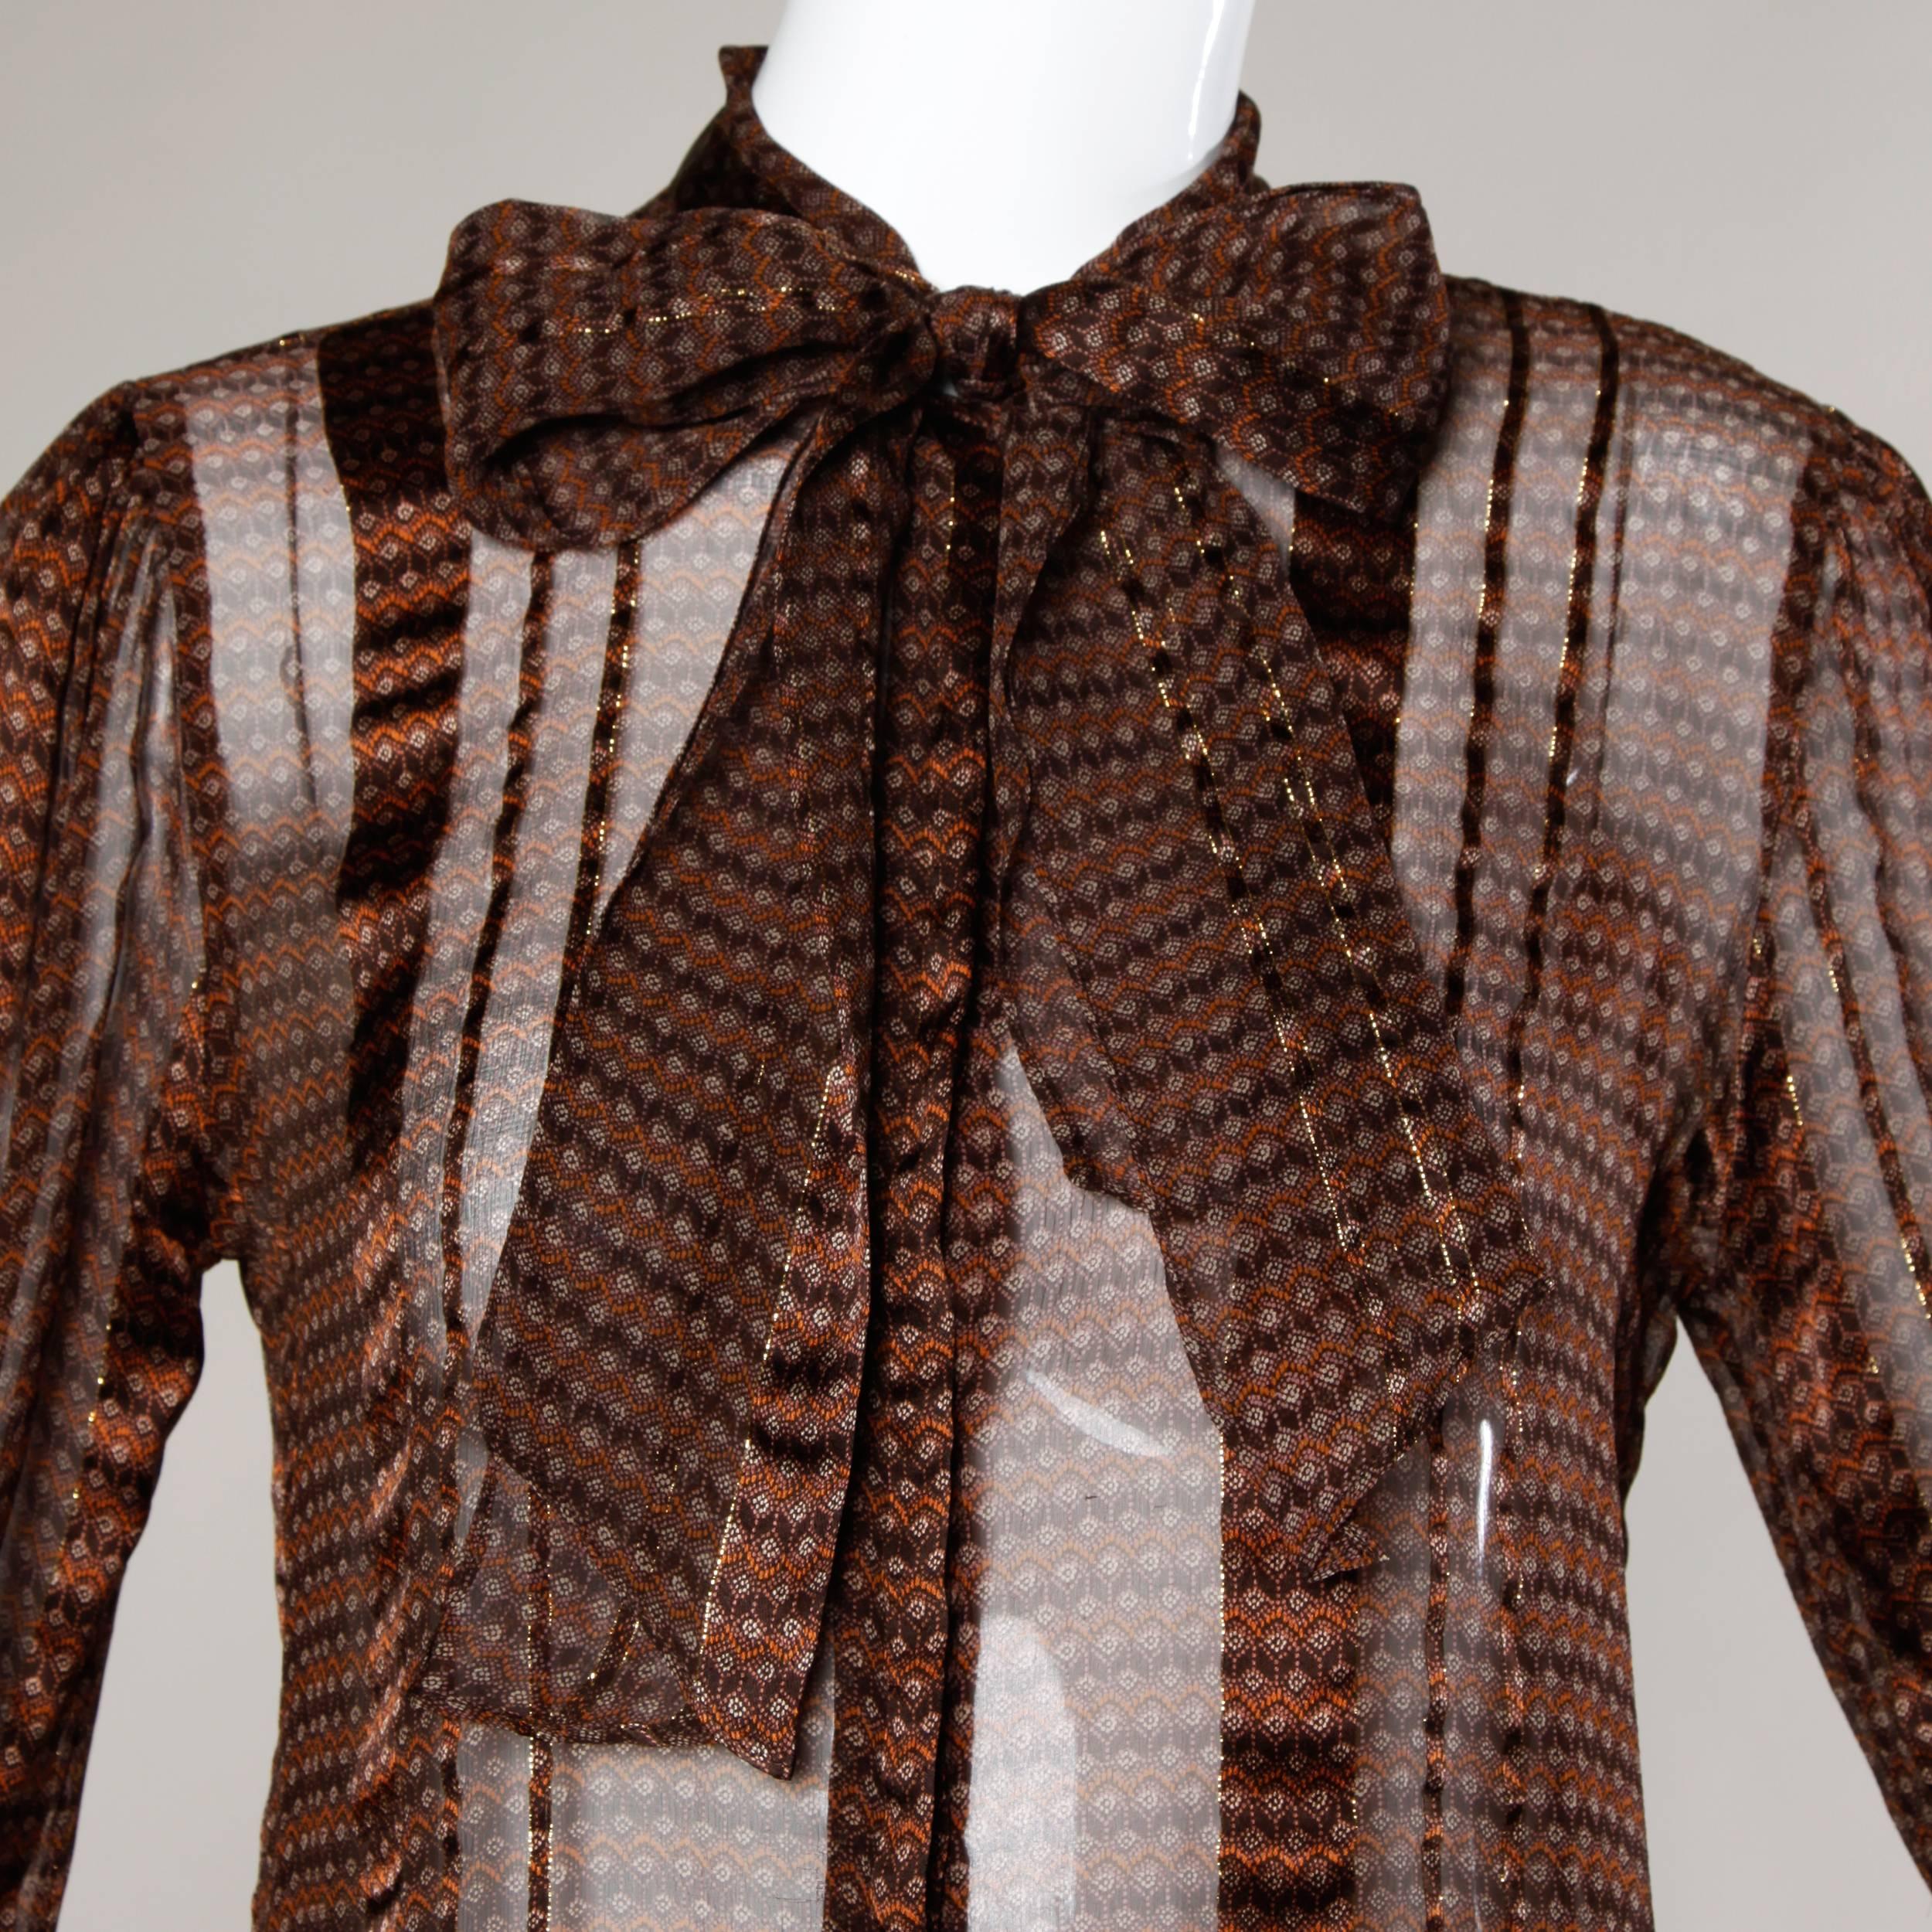 Delicate paper thin silk button up blouse with an ascot bow tie. Completely sheer with a bohemian print.

Details:

Unlined
Front Button Closure
Marked Size: US 10
Estimated Size: M
Color: Brown Multicolor
Fabric: 100% Silk
Label: Lillie